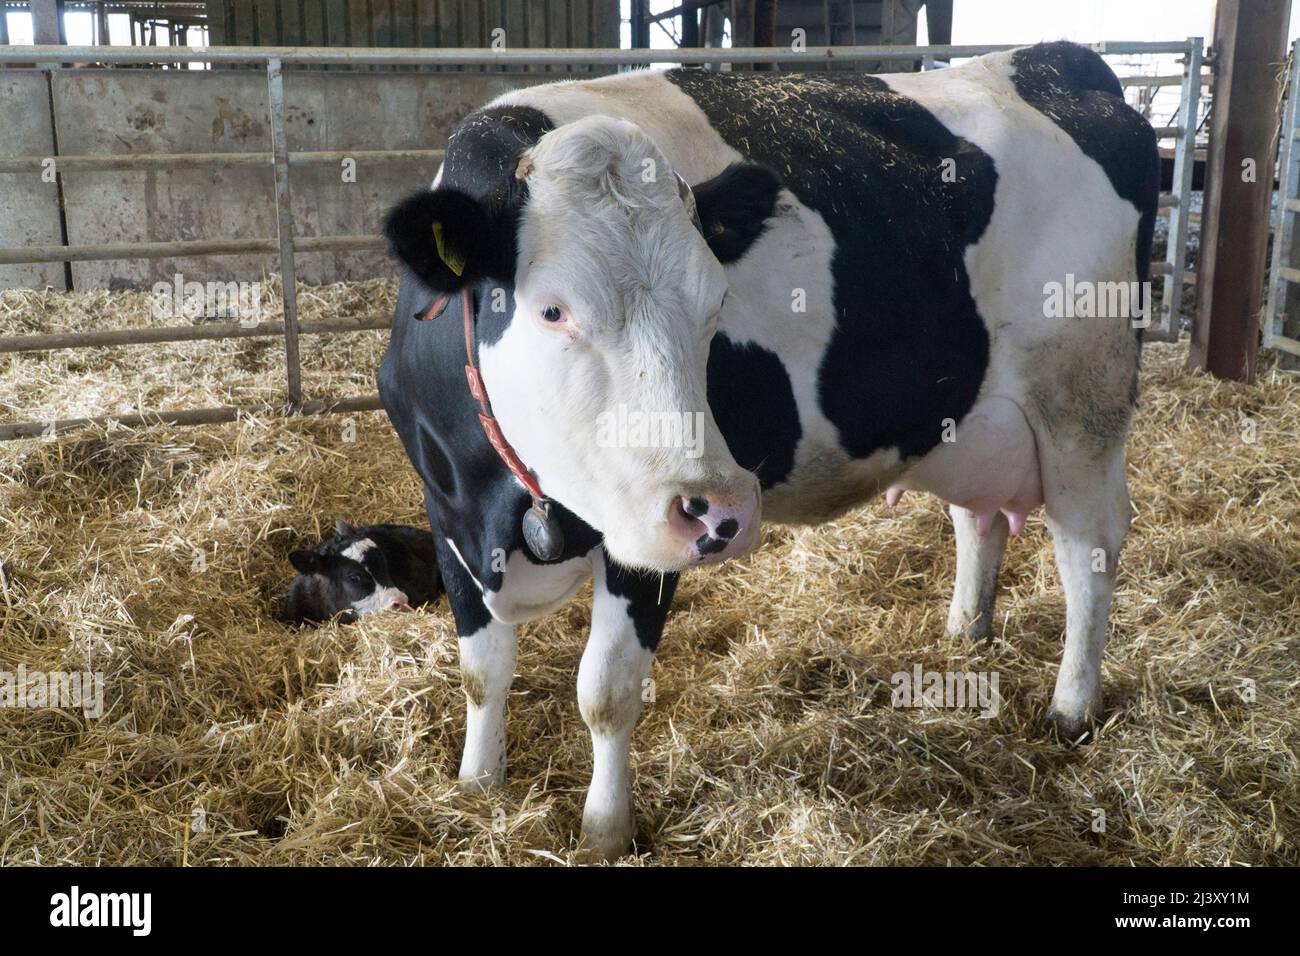 A dairy cow with her calf on an organic farm in Wiltshire.  Anna Watson/Alamy Stock Photo